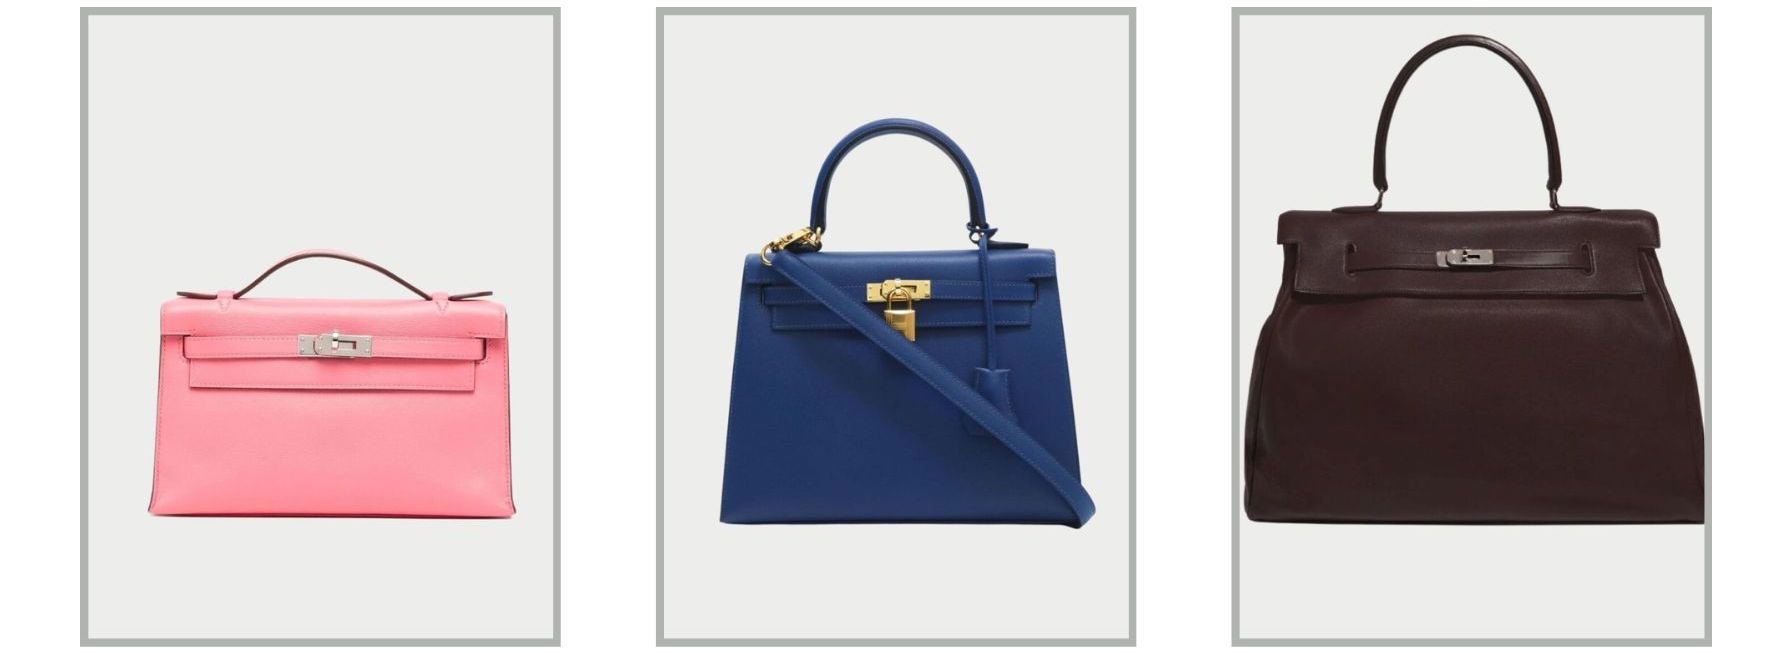 Fashion facts on The Hermes Kelly by The Handbag Clinic